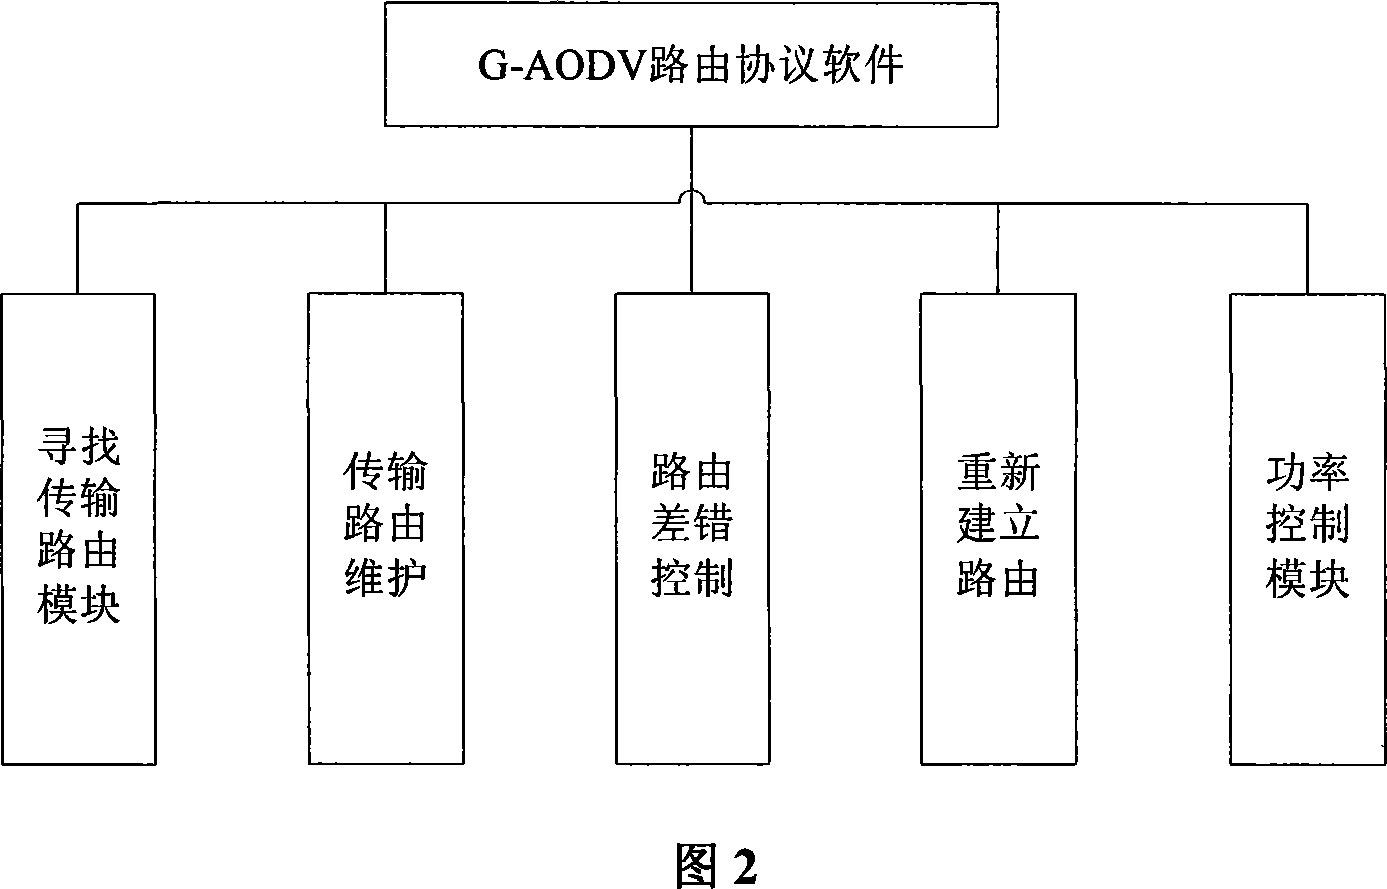 Cluster self-organizing routing method and device